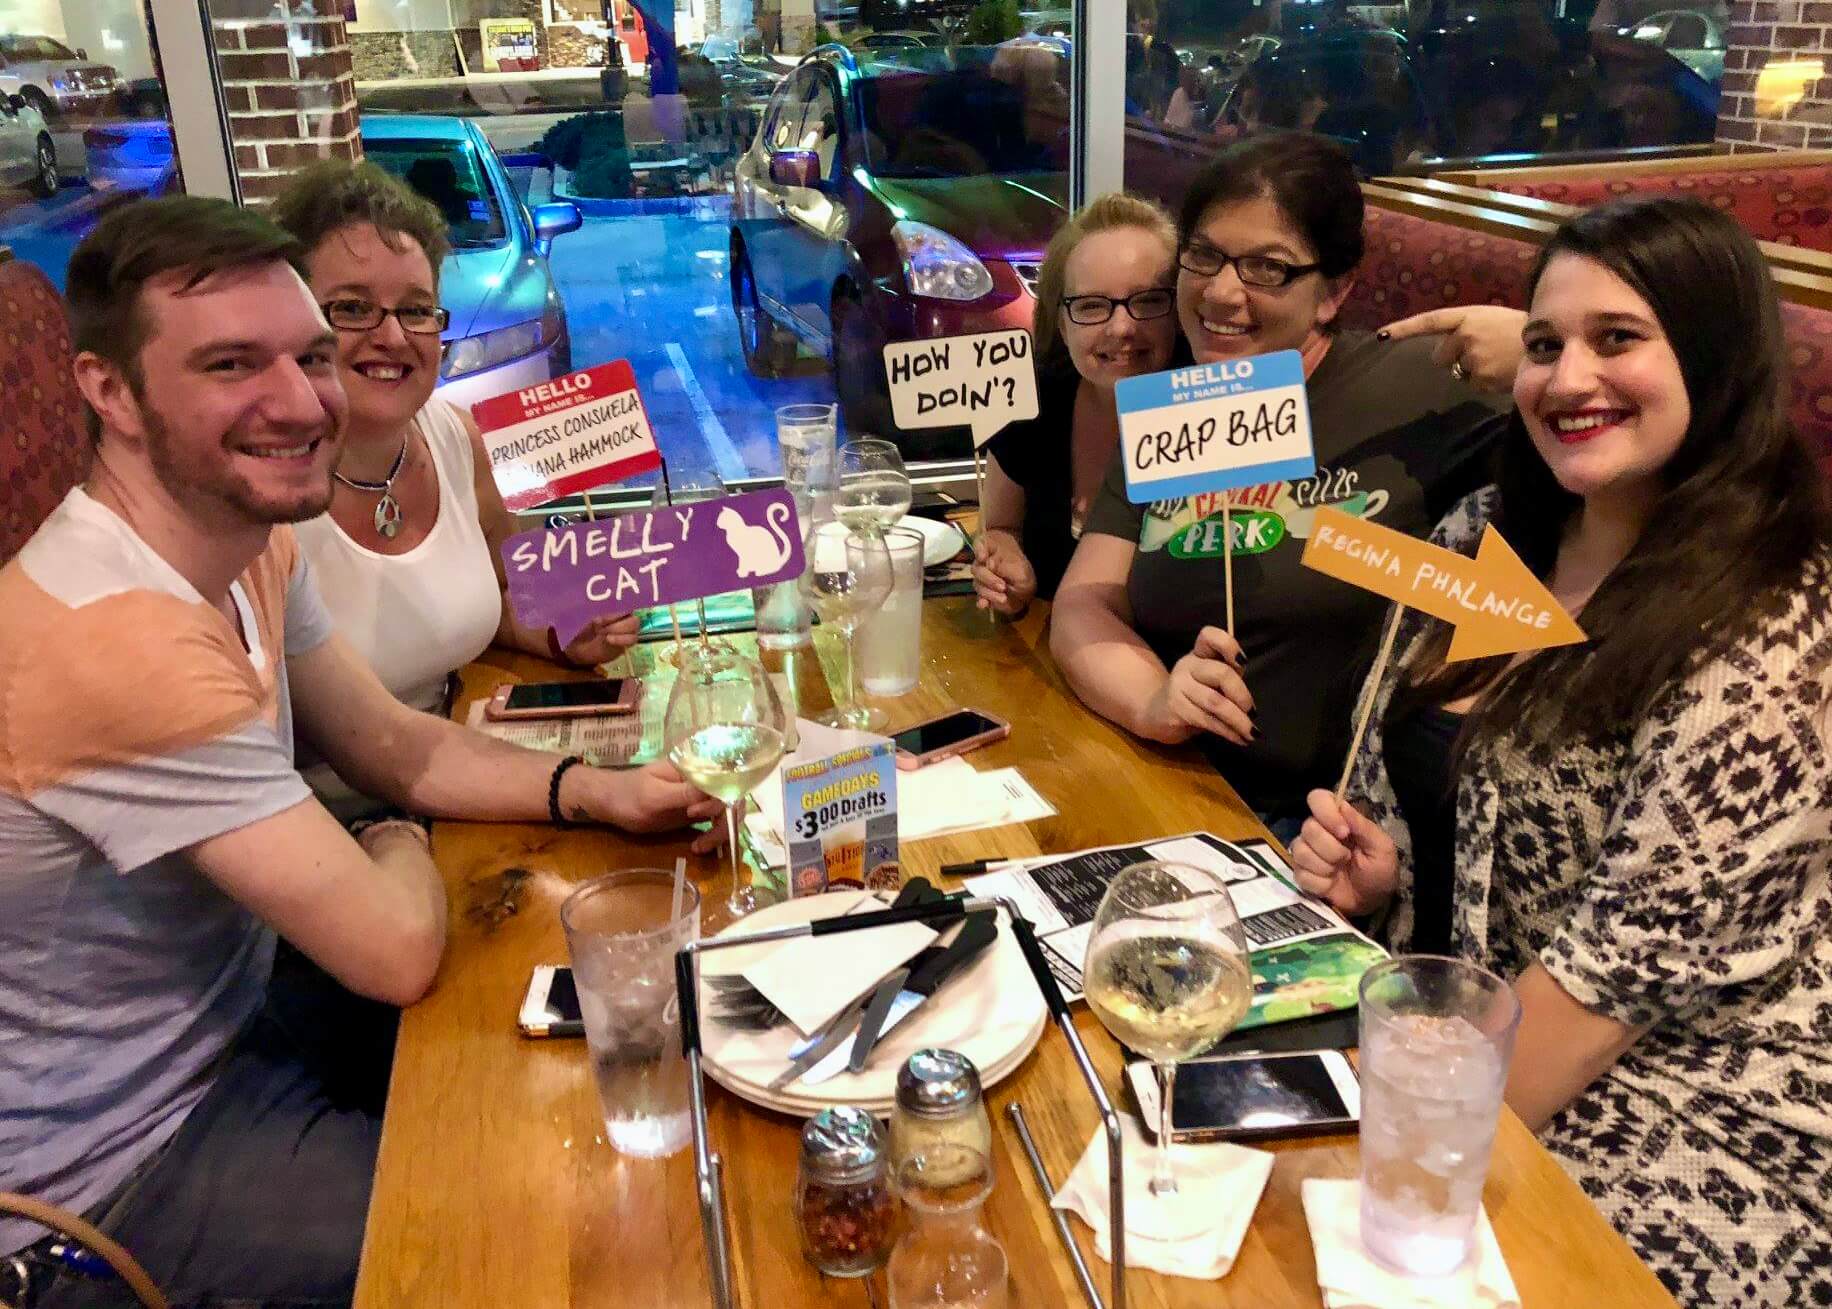 Mellow Mushroom Jacksonville FL 32246 trivia night: group of adults seated around a table having fun and smiling while holding up fun name tag signs for a trivia theme night